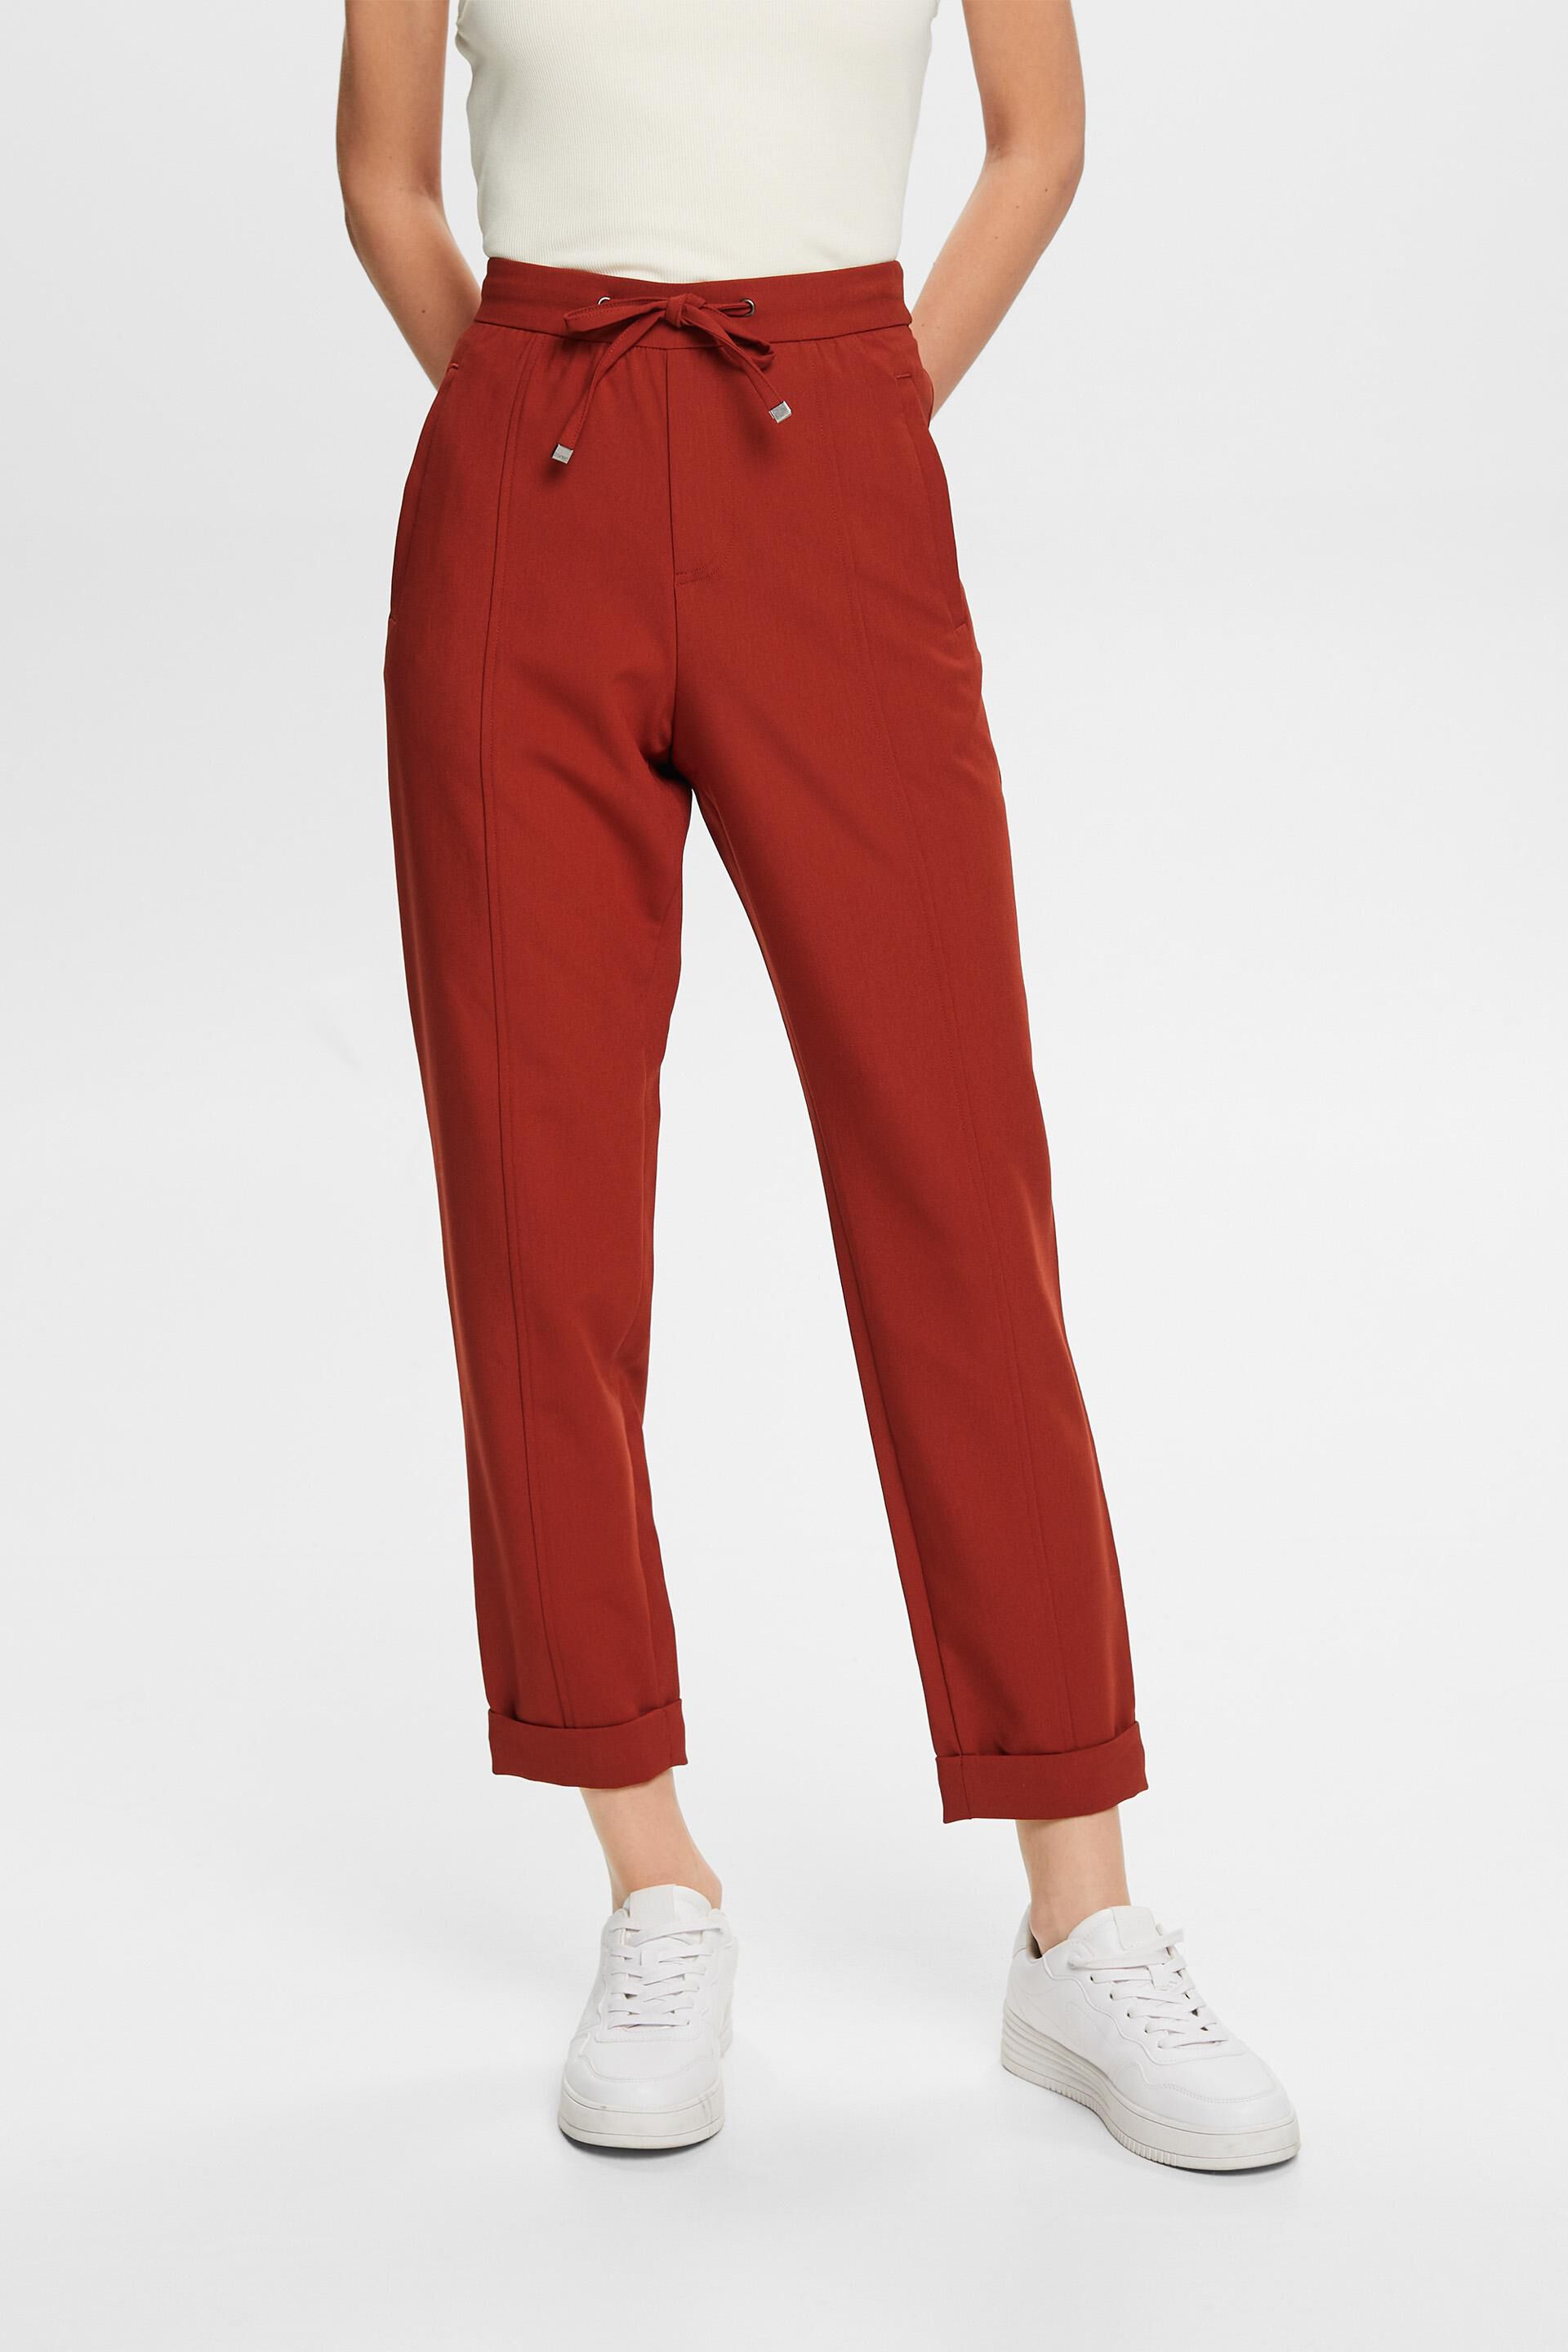 Esprit Mid-rise style jogger trousers